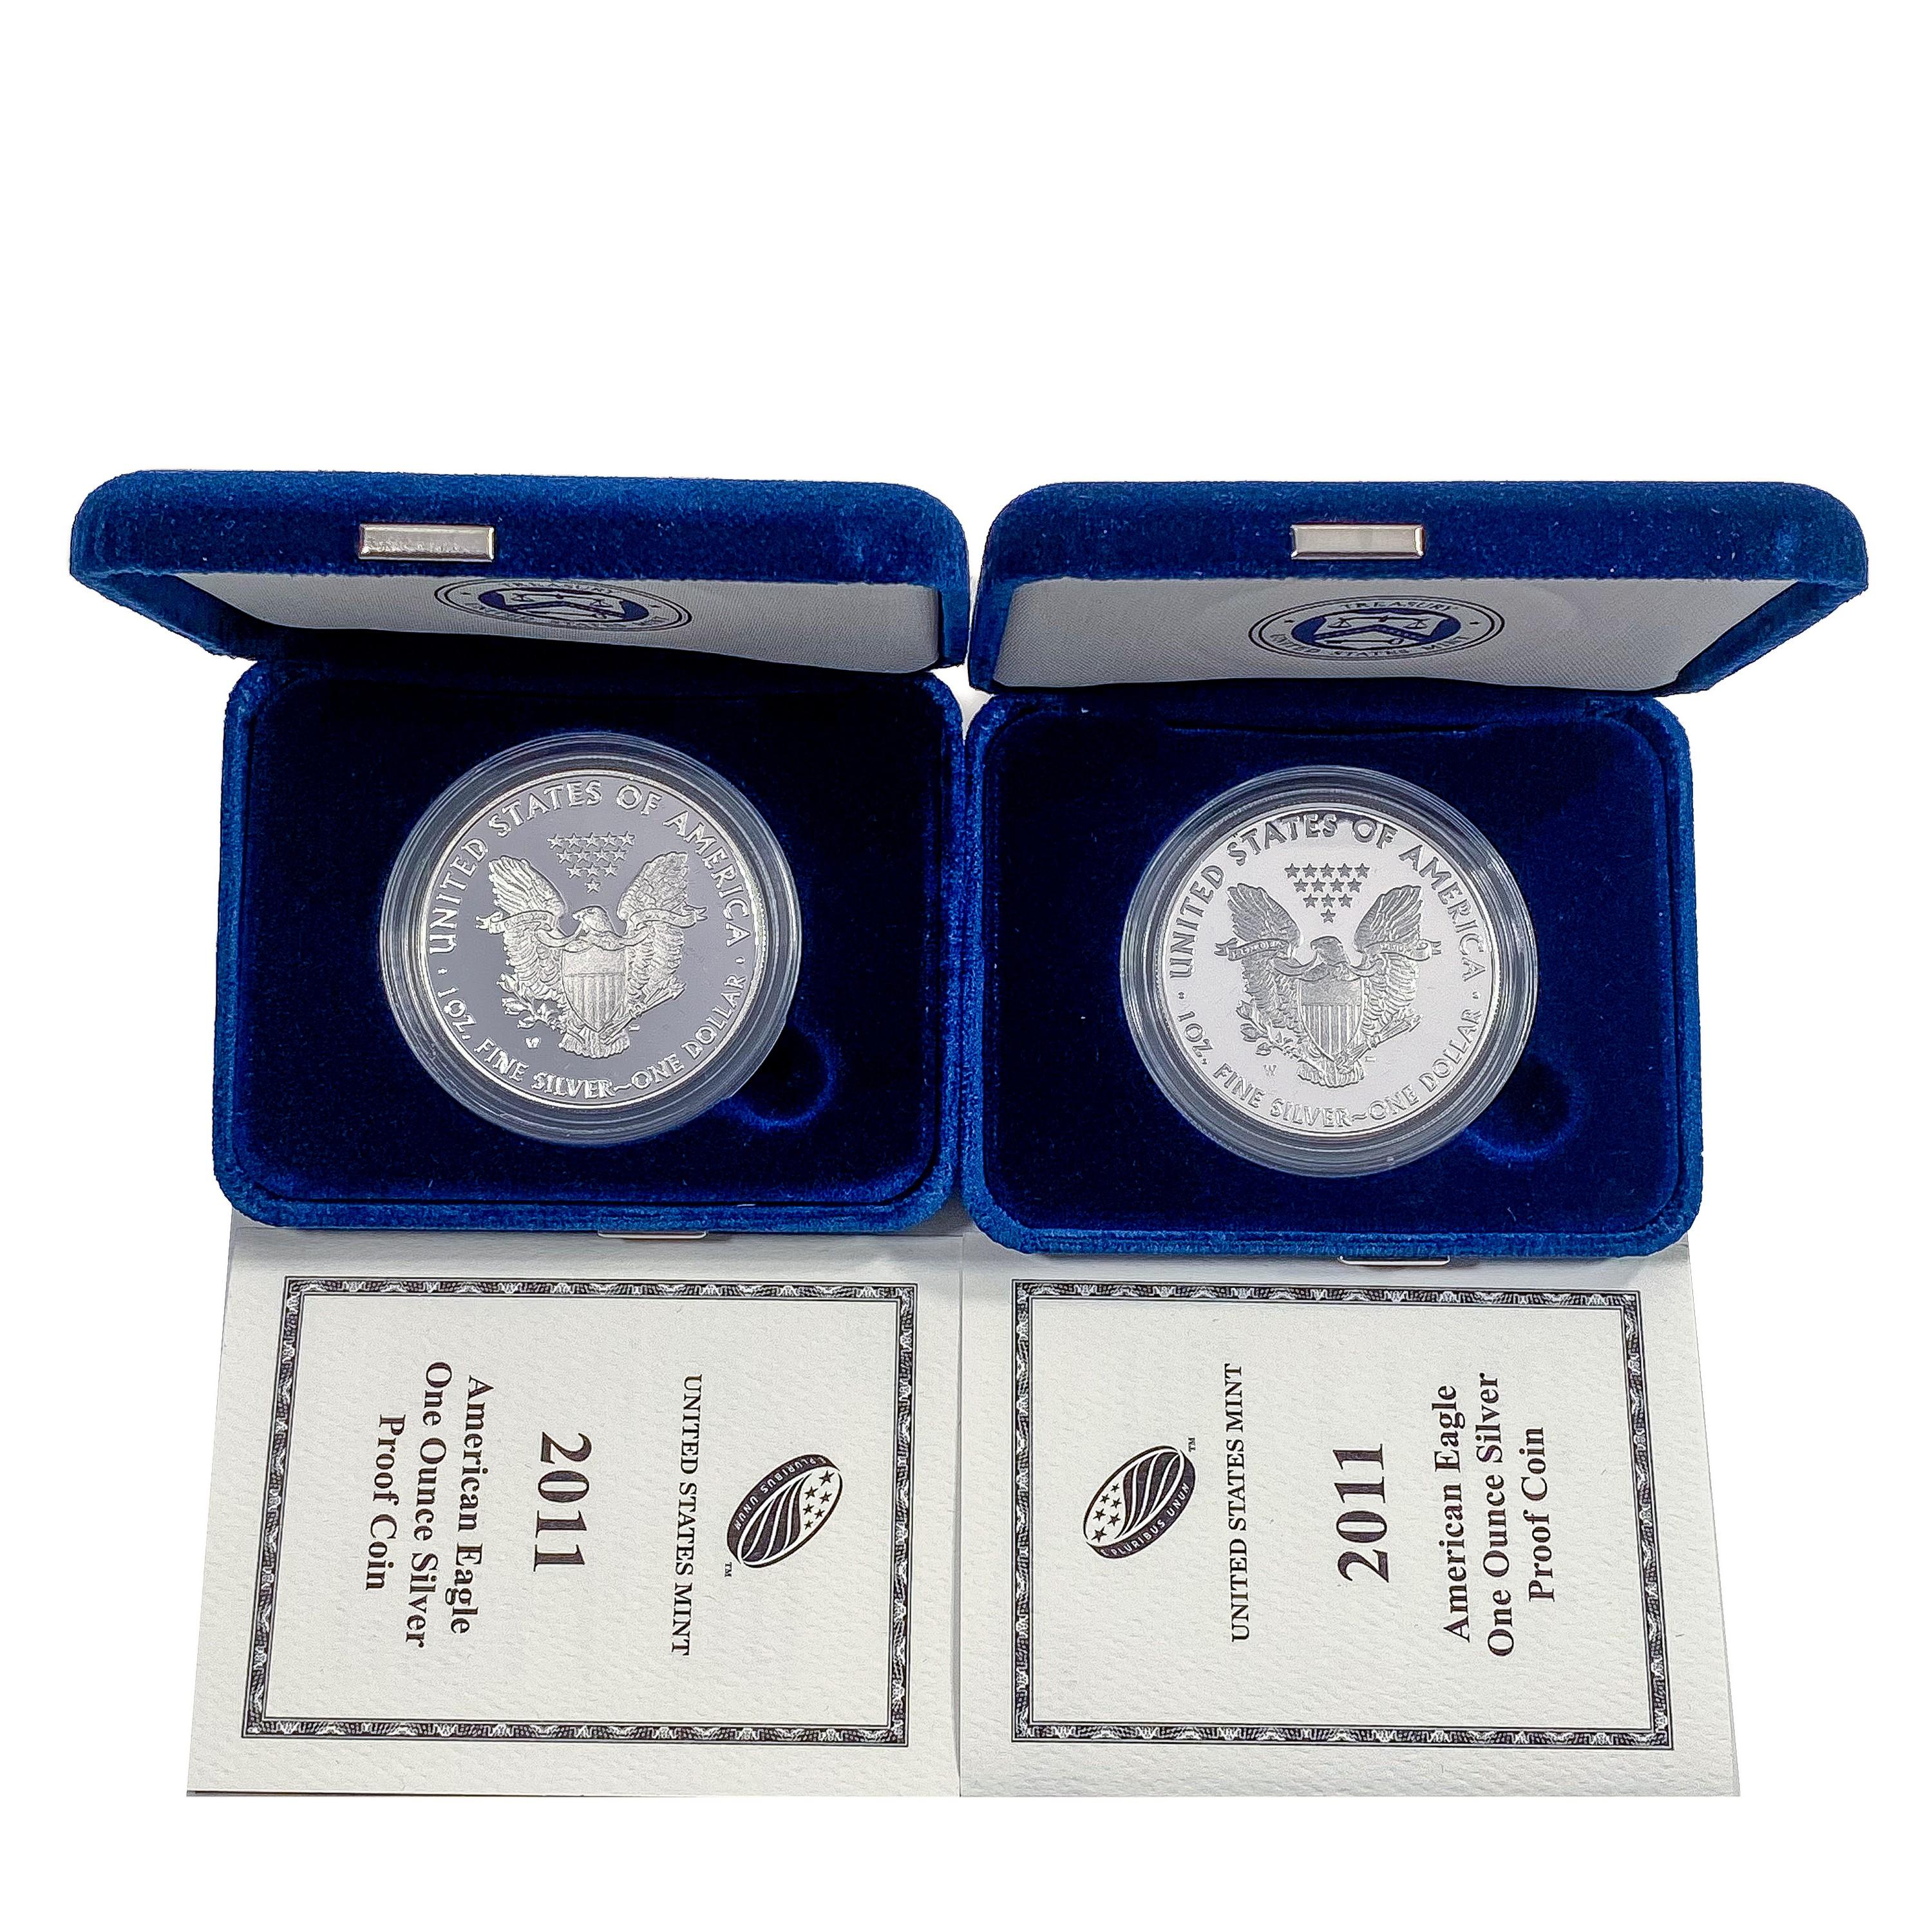 2011 US 1oz Silver Eagle Proof Coins [2 Coins]